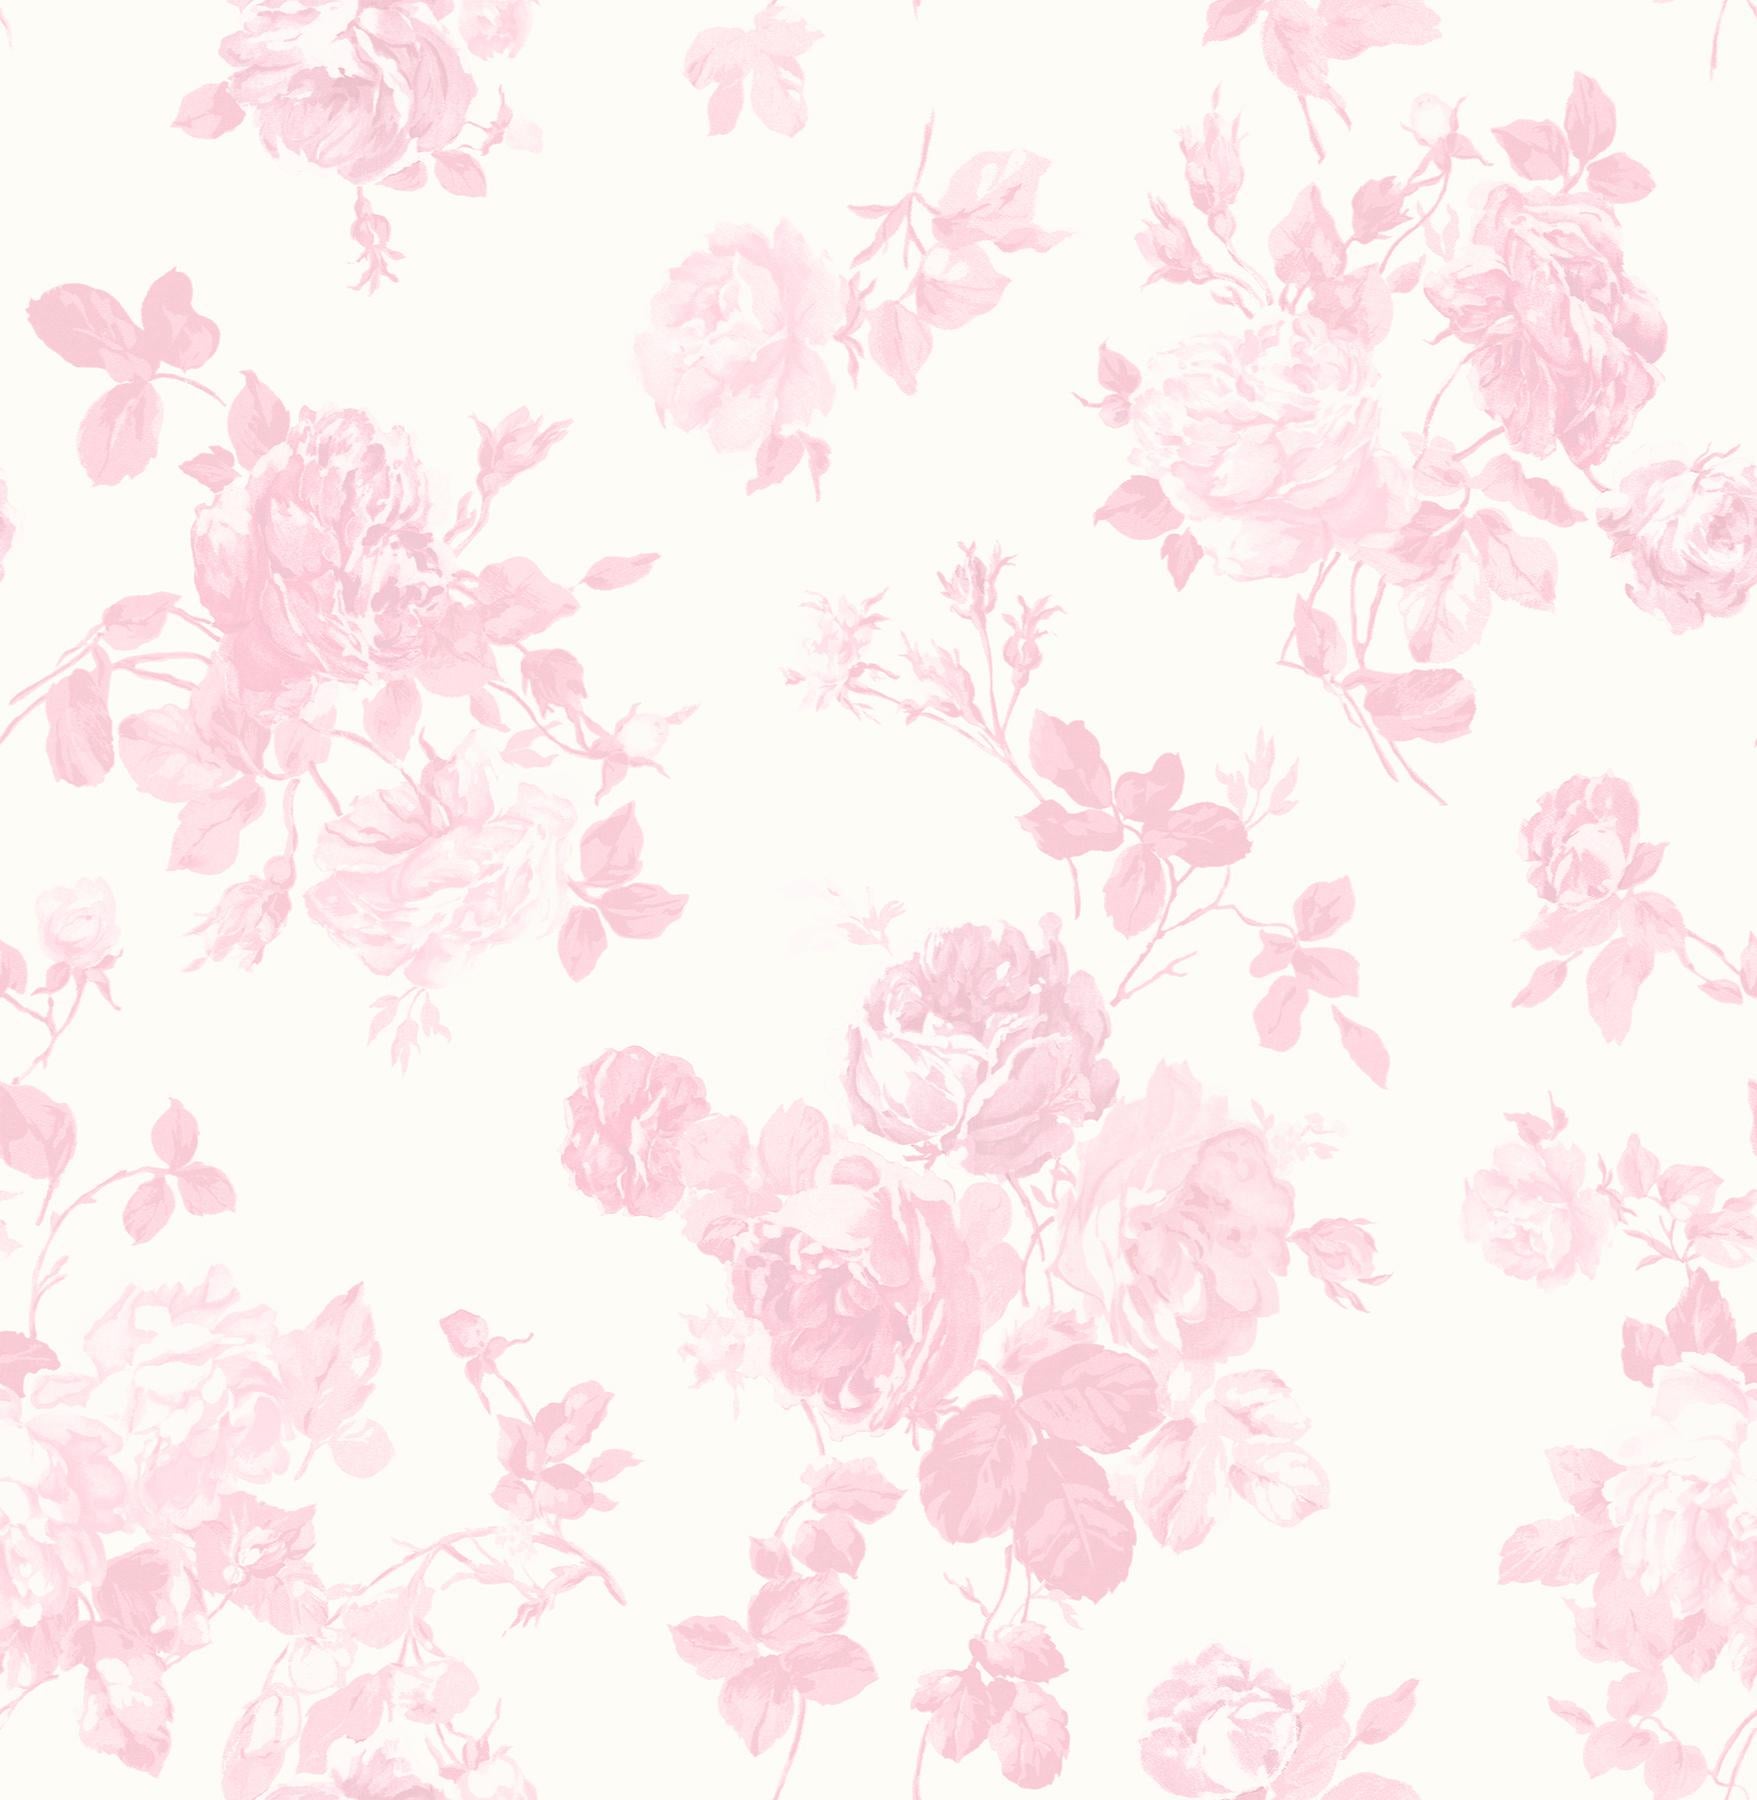 Seamless pattern with Beautiful flowers. Watercolor or acrylic